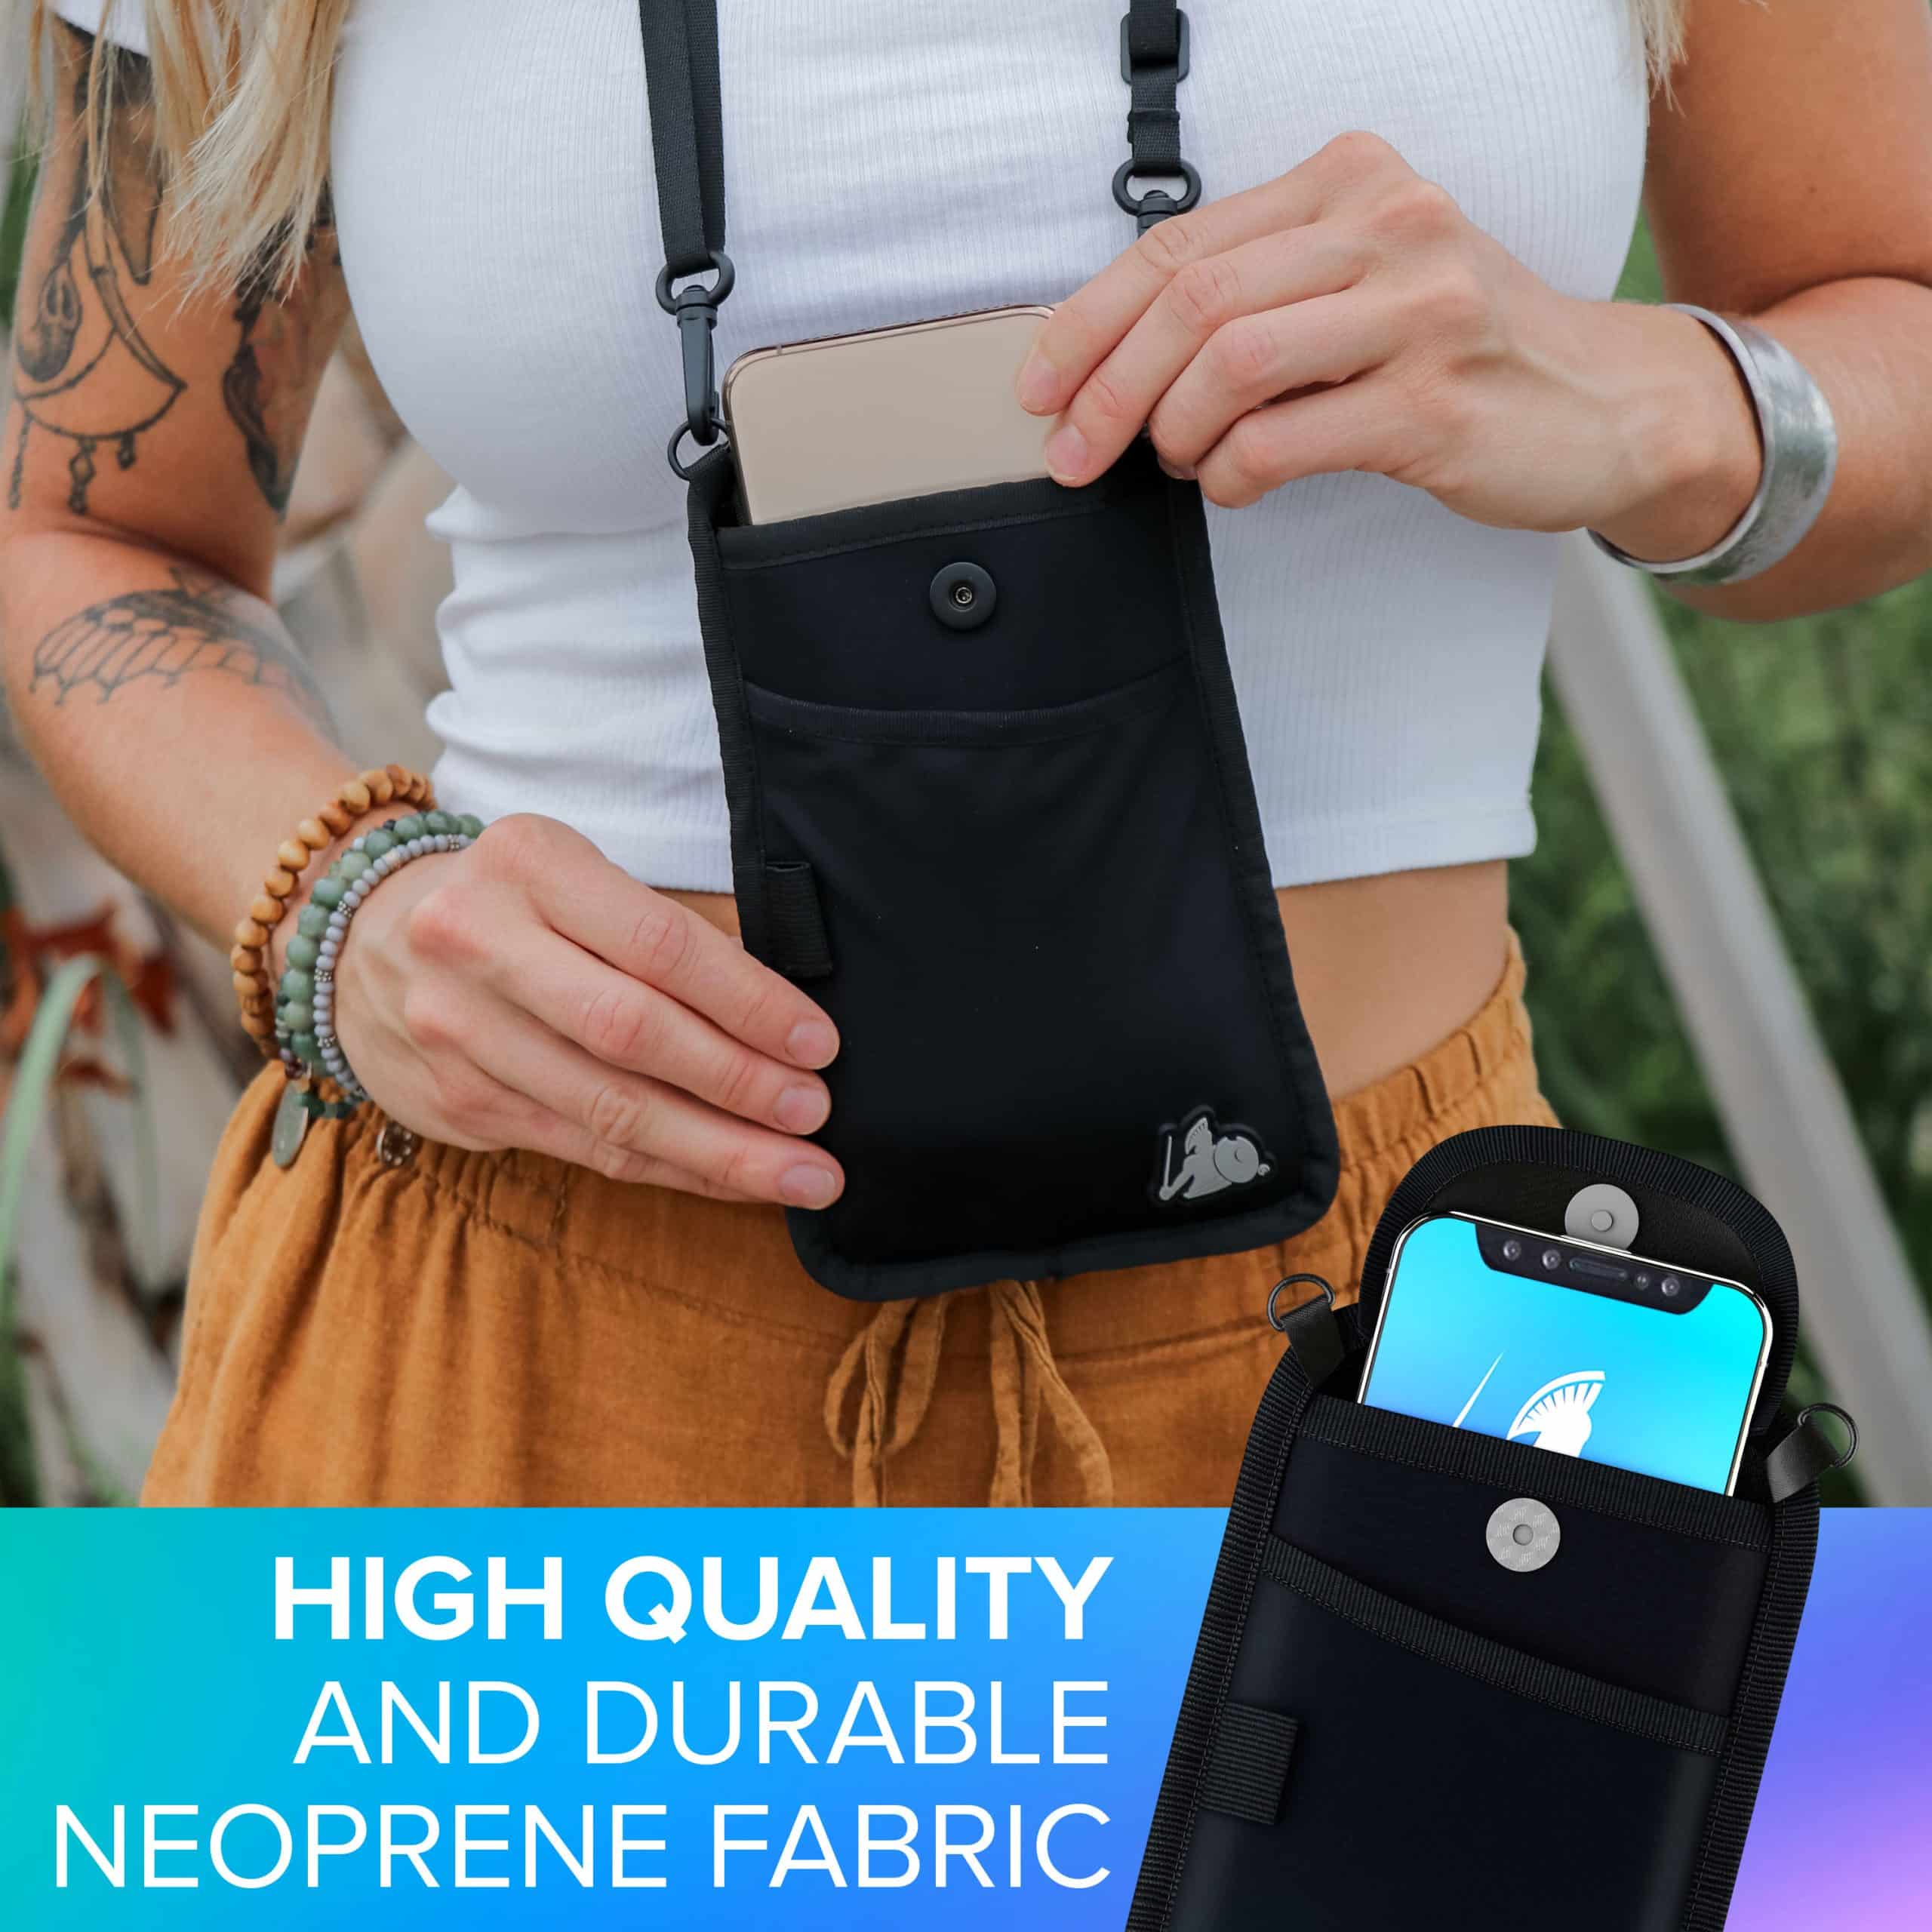 HALSA EMF Protection Cell Phone Sleeve, EMF Blocking Carrying Case, Phone  Pouch. High Shielding Efficiency, Fits in Pocket or Purse. Fits Most  Phones.